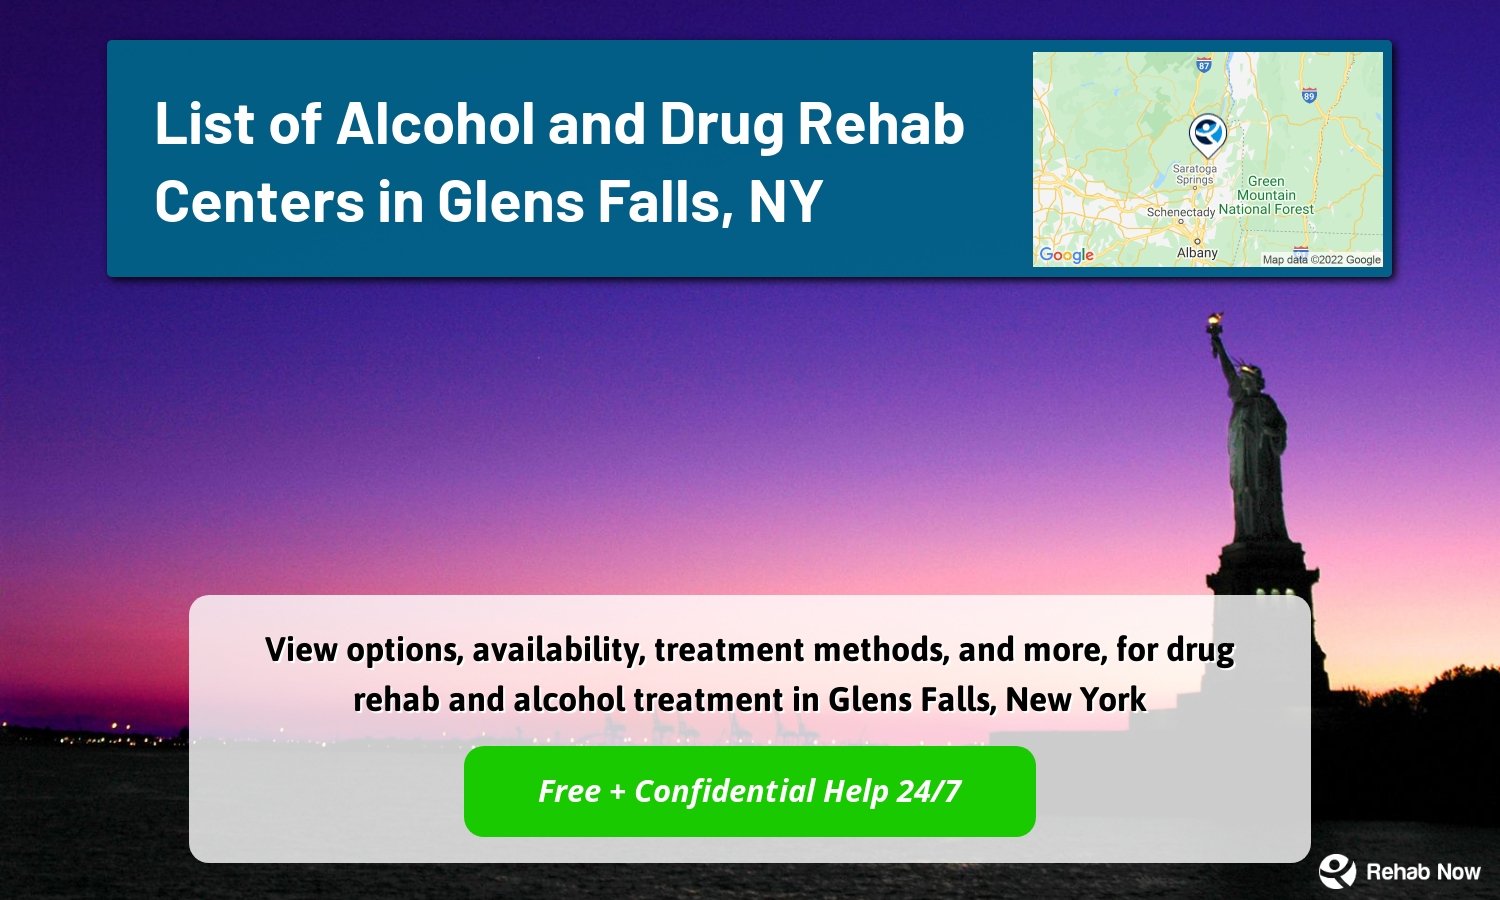 View options, availability, treatment methods, and more, for drug rehab and alcohol treatment in Glens Falls, New York